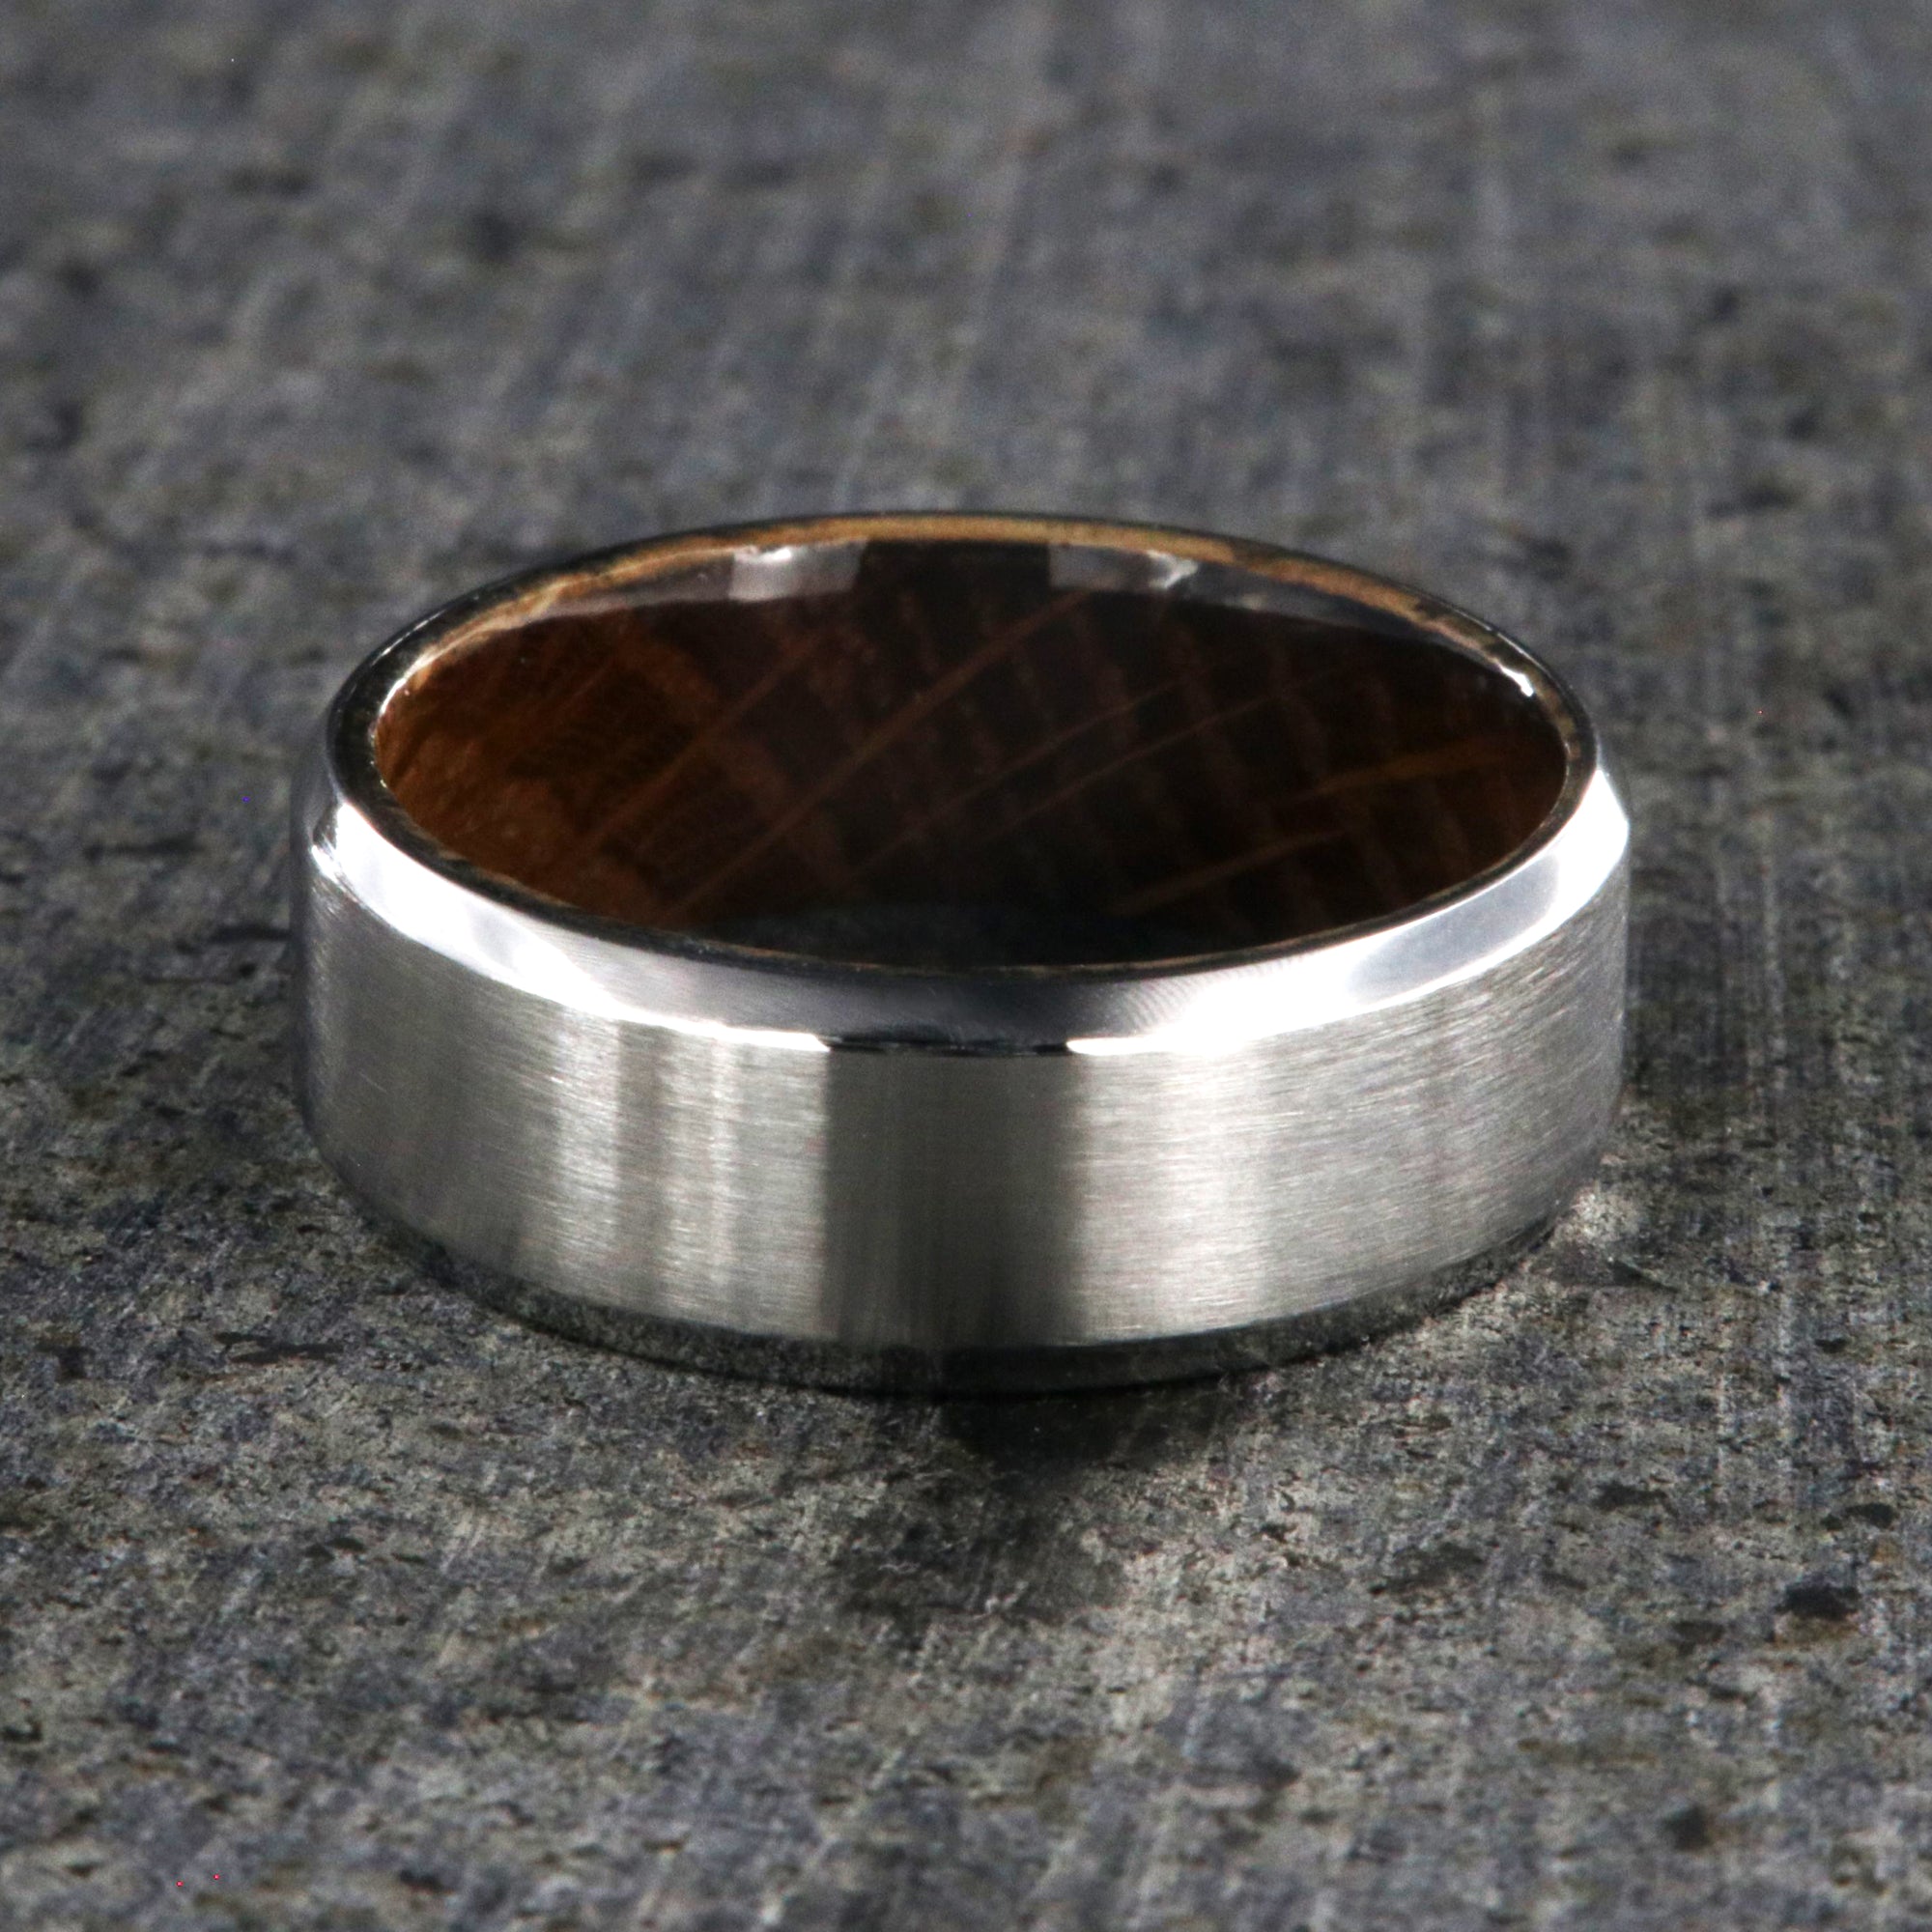 8mm wide cobalt ring with a brushed finish, beveled edges, and a whiskey barrel sleeve